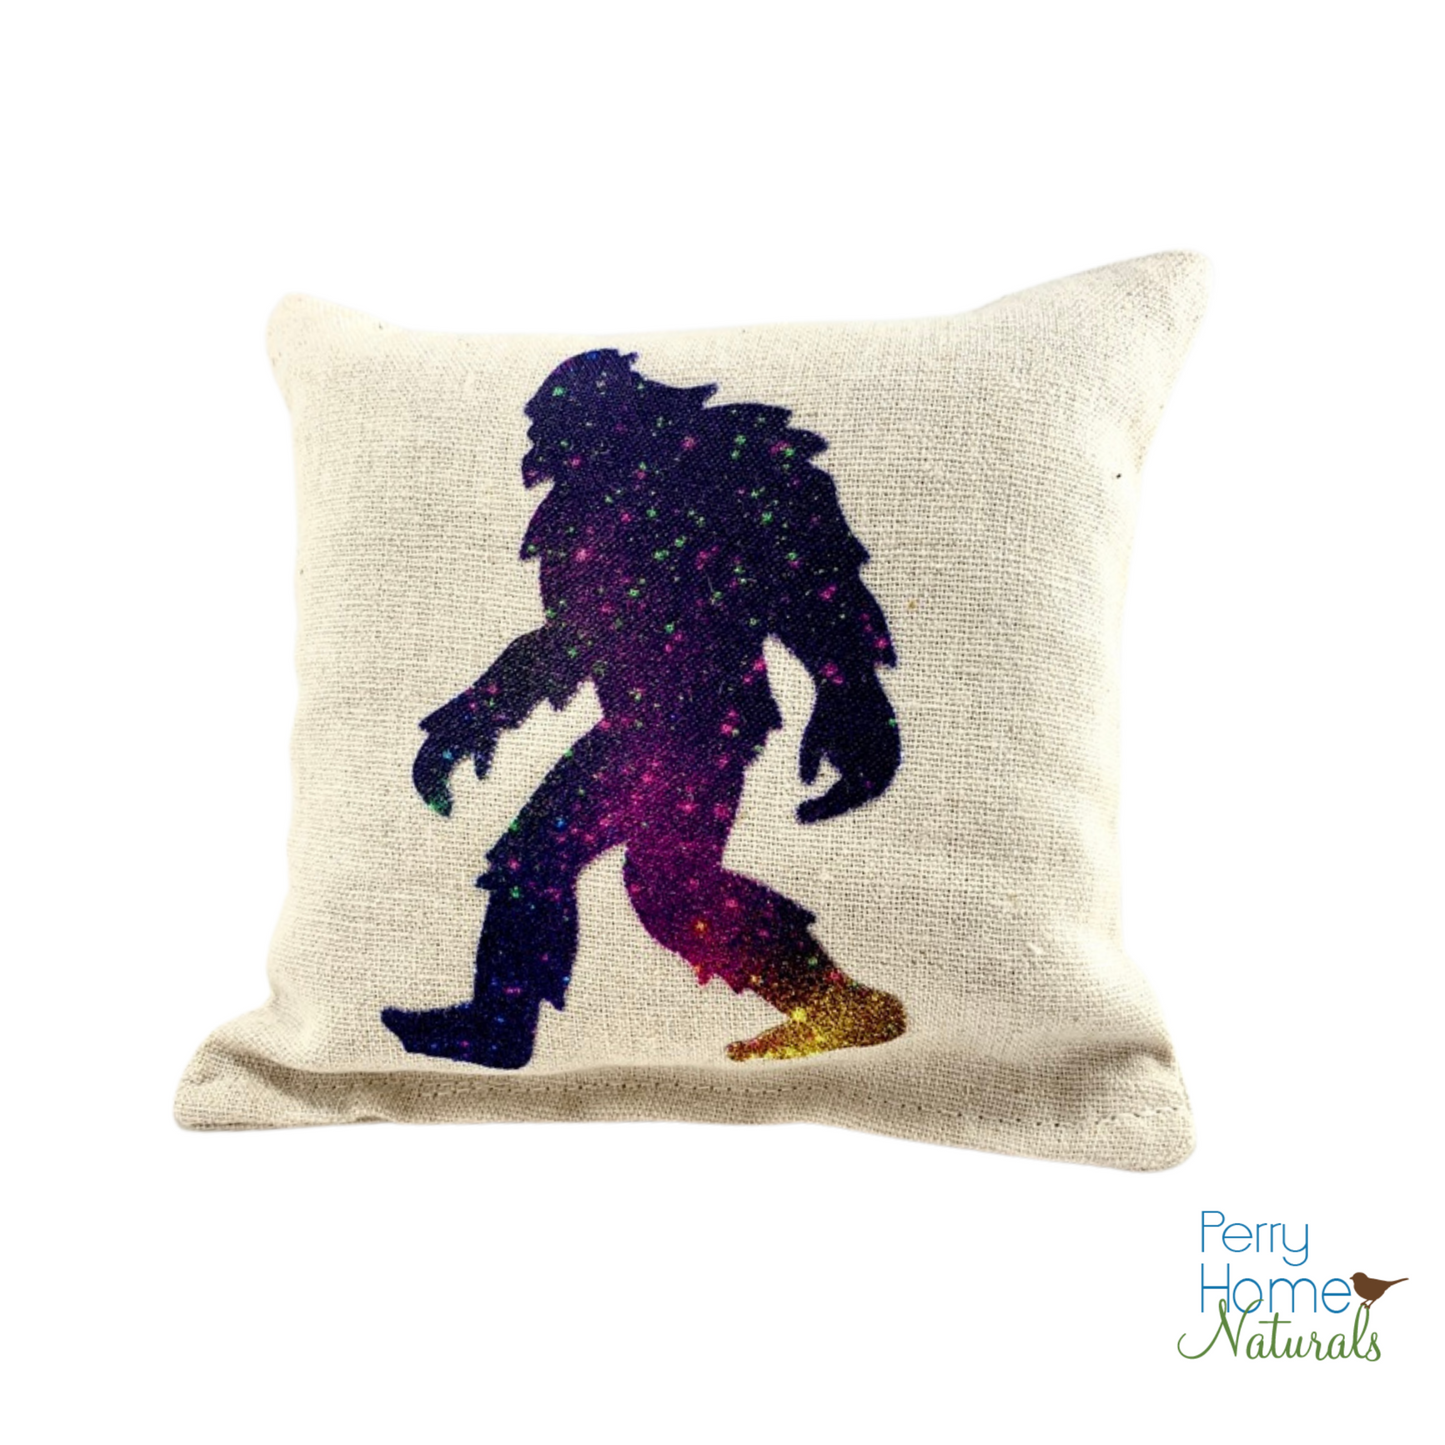 Sasquatch Sachet (Size M only) - Choice of Applique Color and Scent